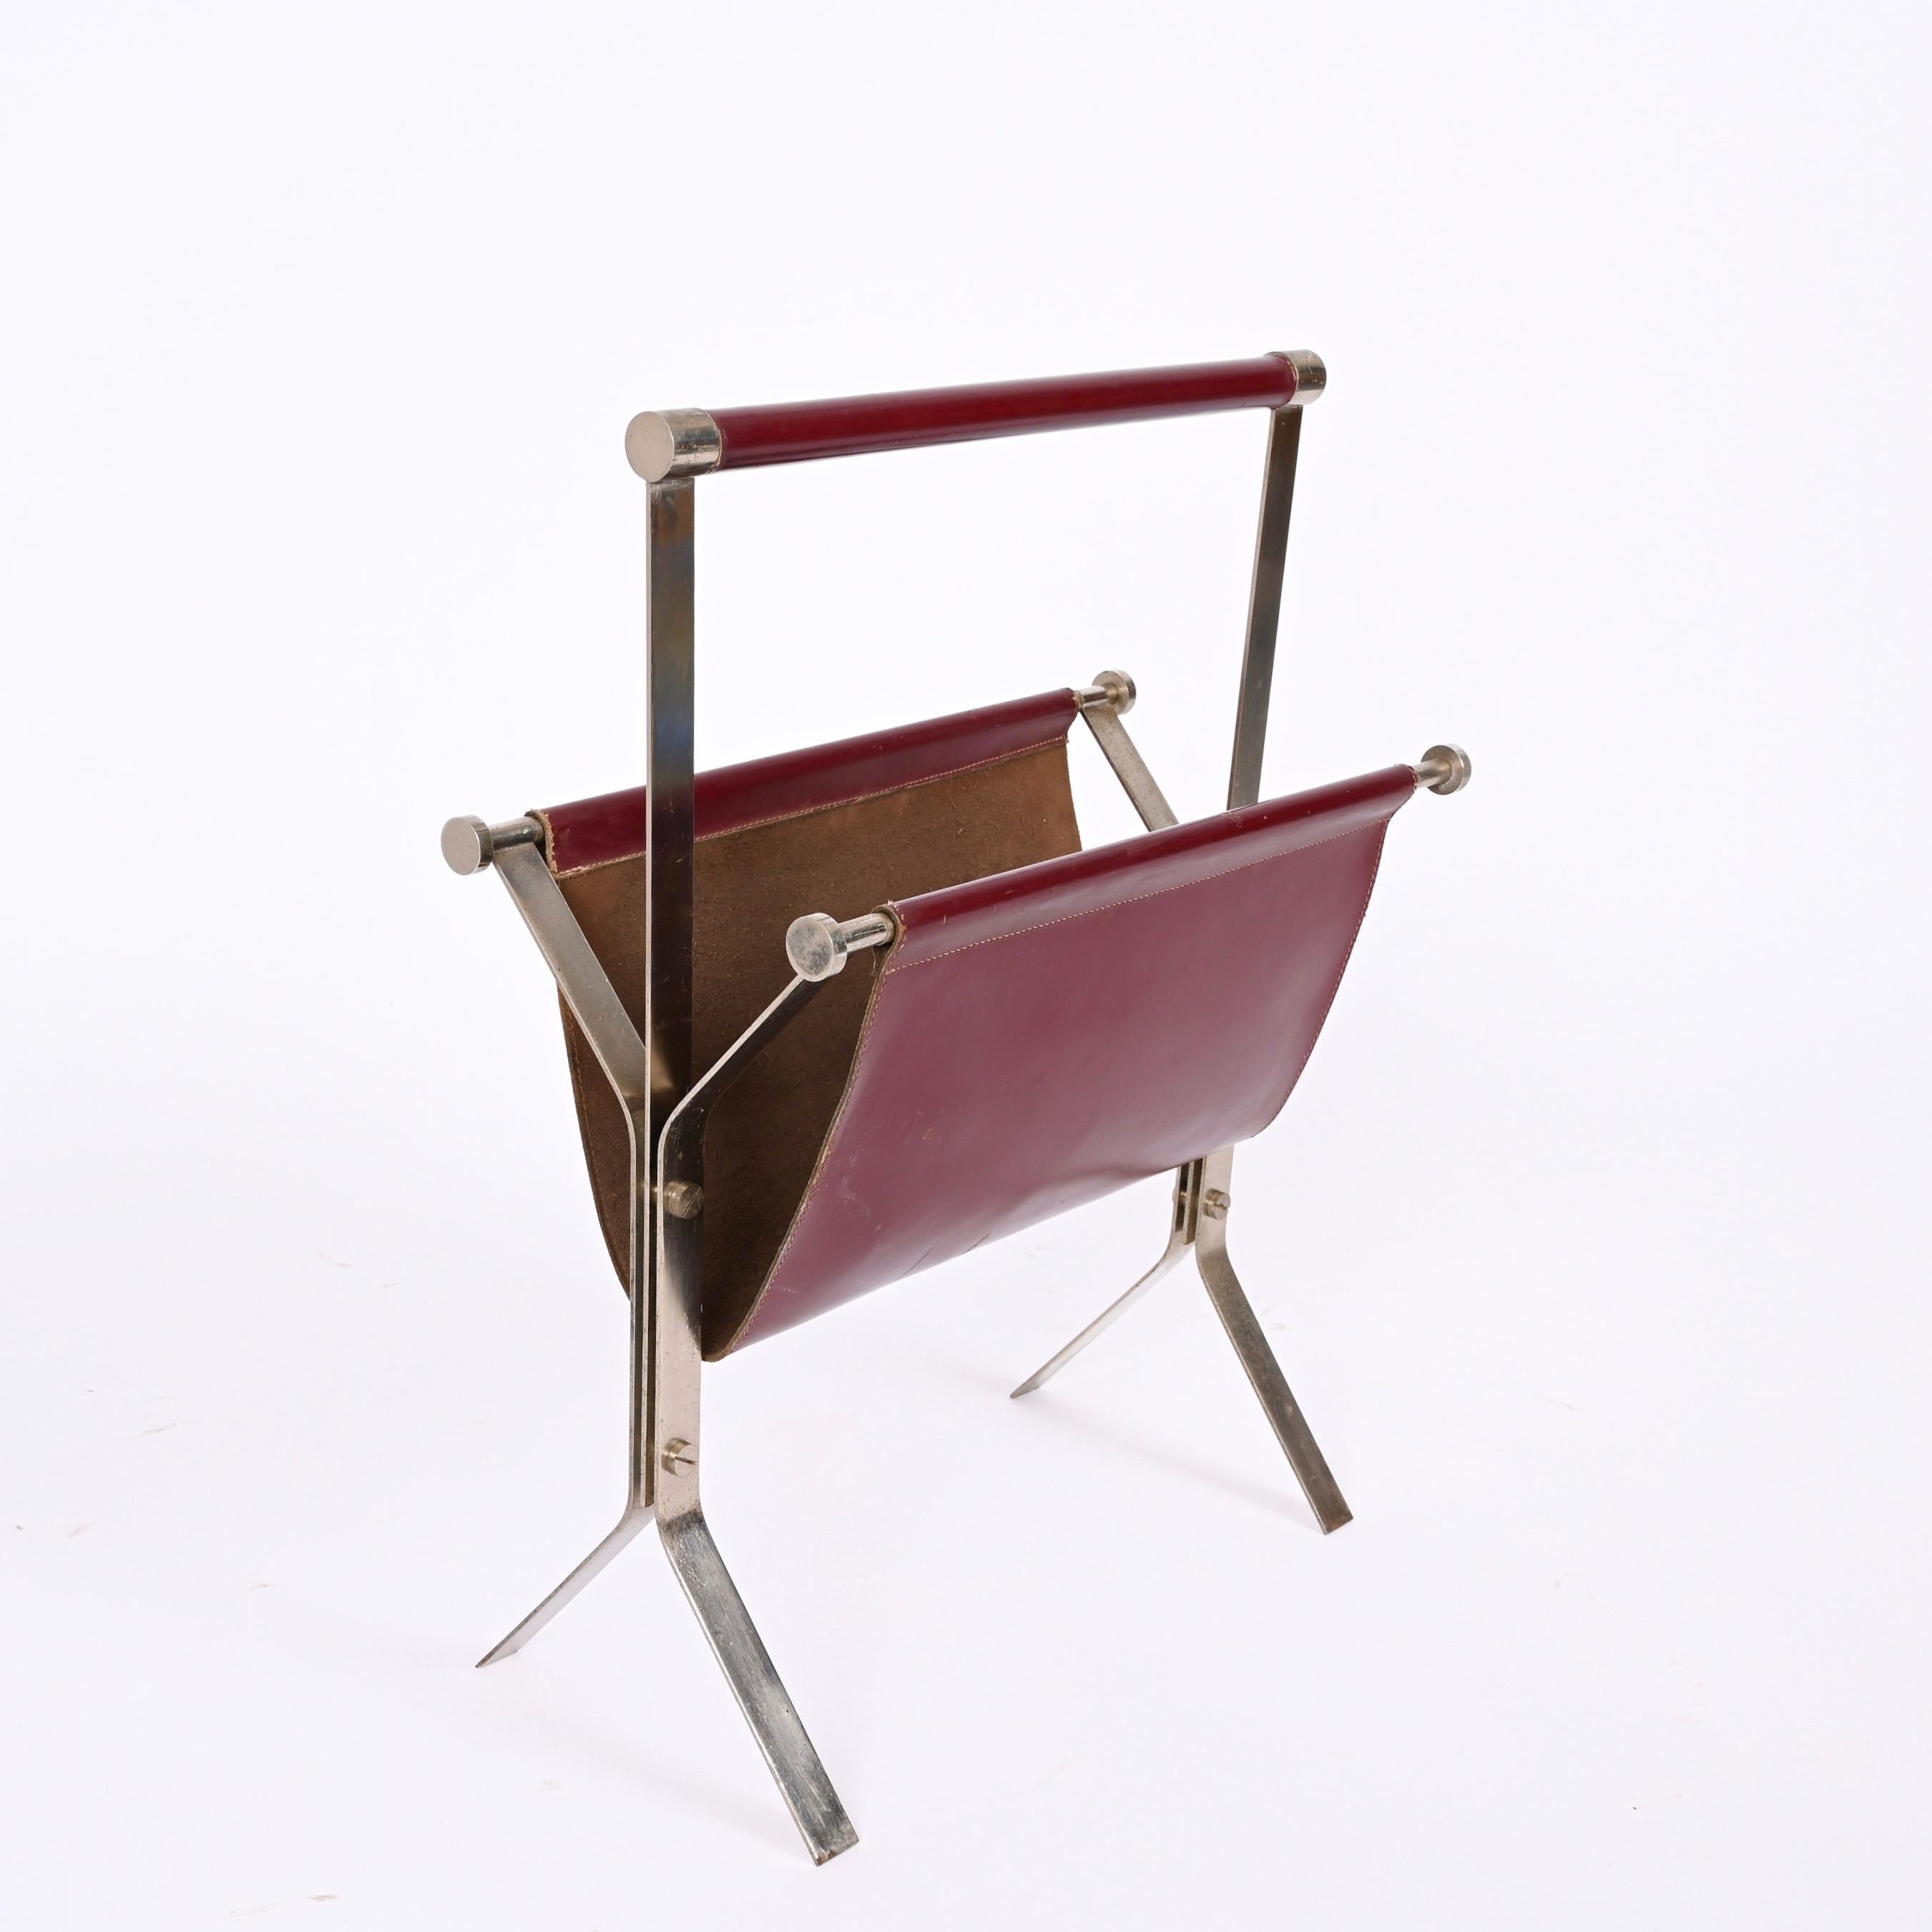 Alessandro Albrizzi Midcentury Chromed Steel and Red Leather Magazine Rack 1970s For Sale 1